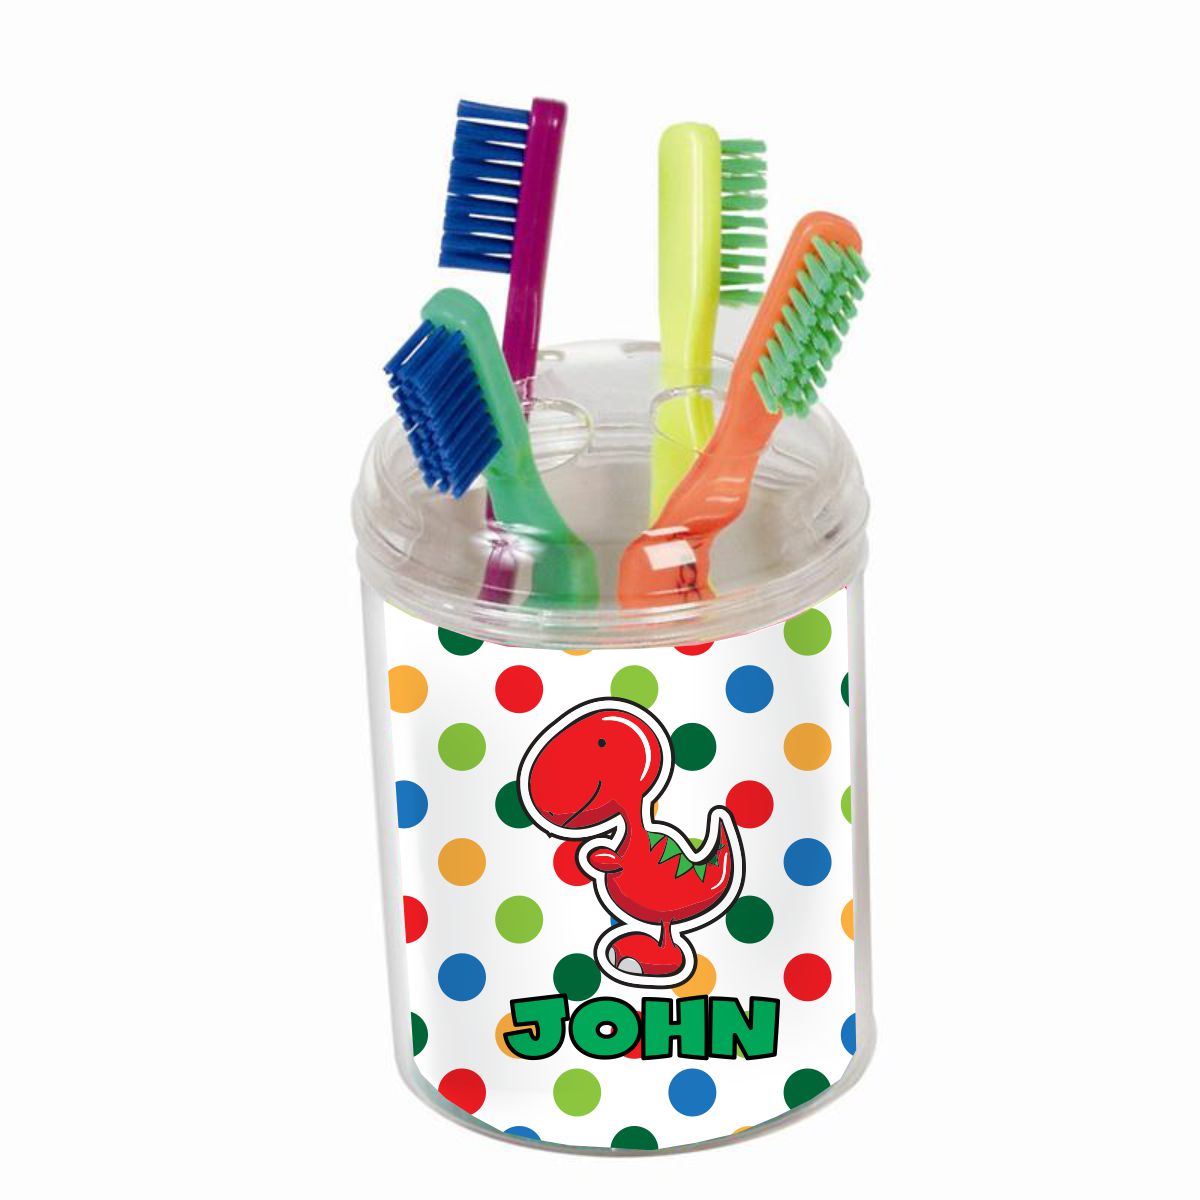 Personalized Dinosaur Toothbrush Holder - 2 | Potty Training Concepts